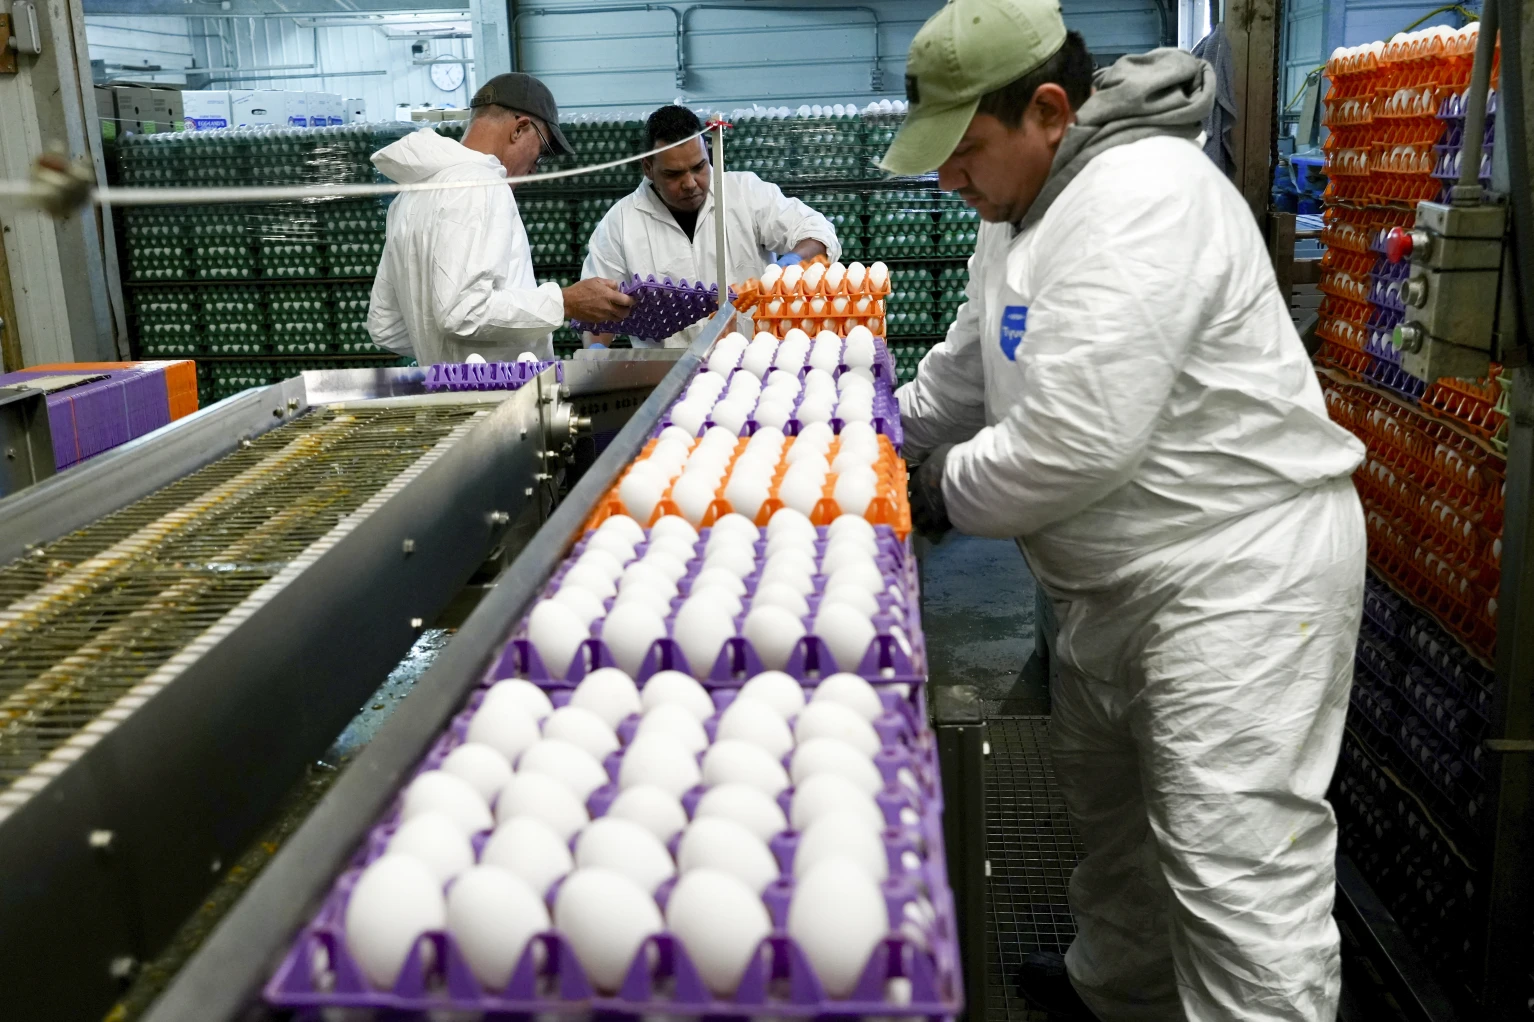 A worker moves crates of eggs at the Sunrise Farms processing plant in Petaluma, California, which has seen an outbreak of avian flu in recent weeks, January 11, 2024. /AP